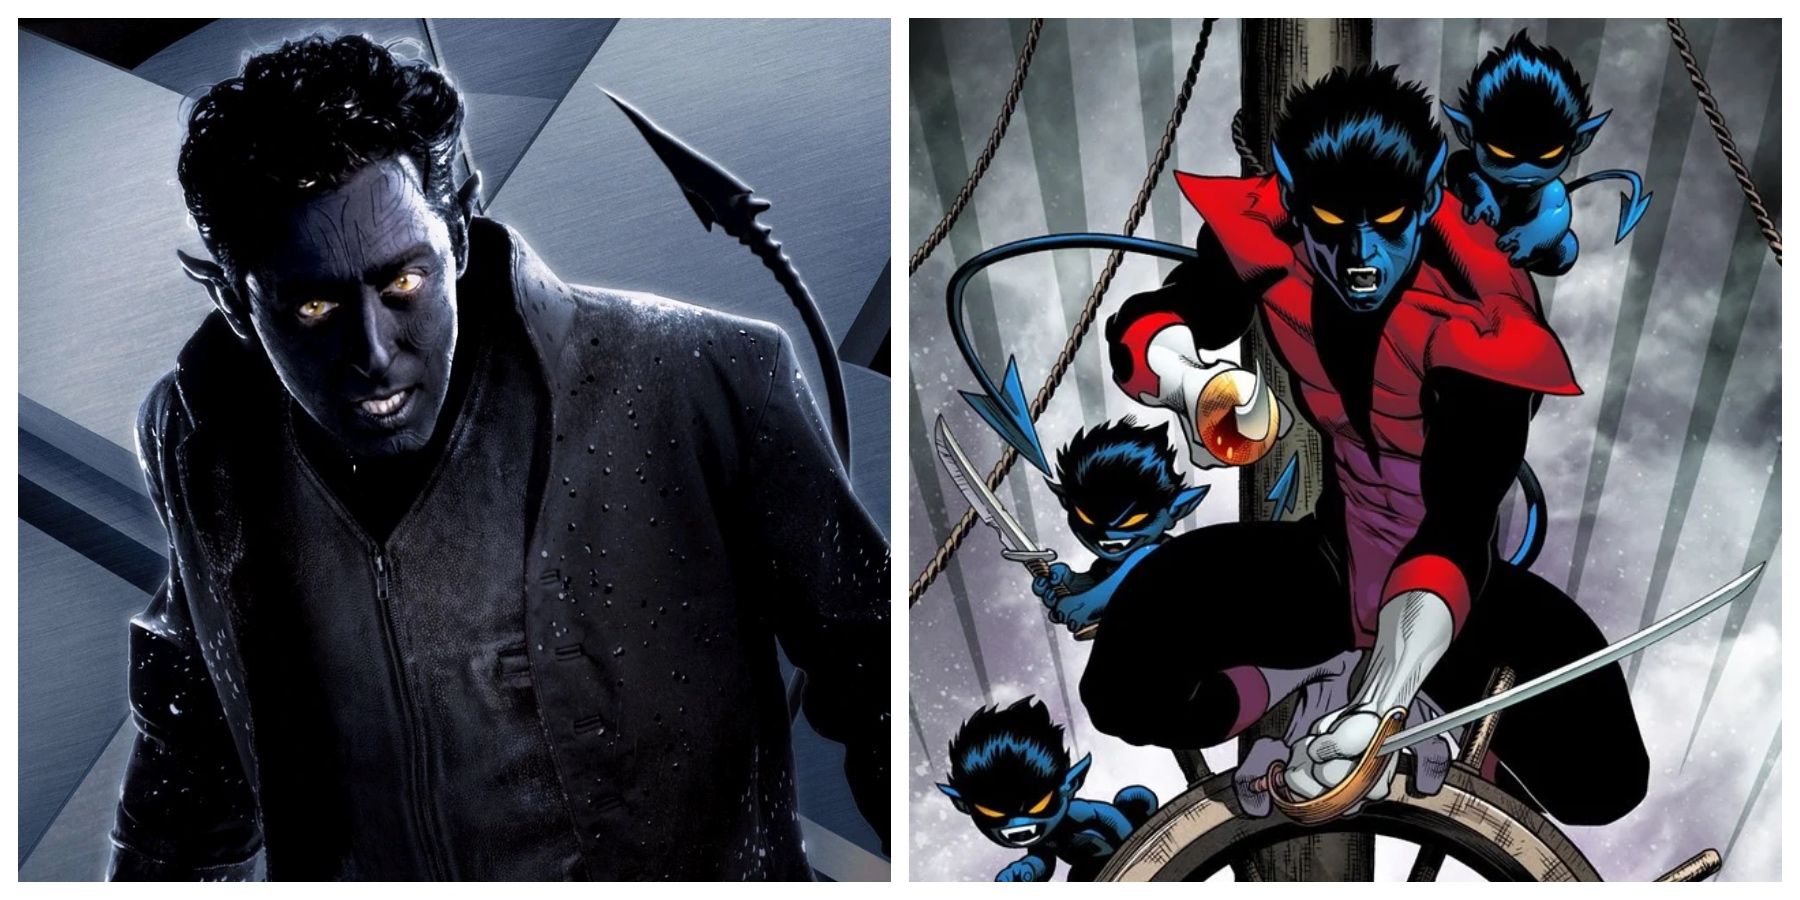 X-Men: 5 Things About Nightcrawler the Next Movie Needs to Get Right